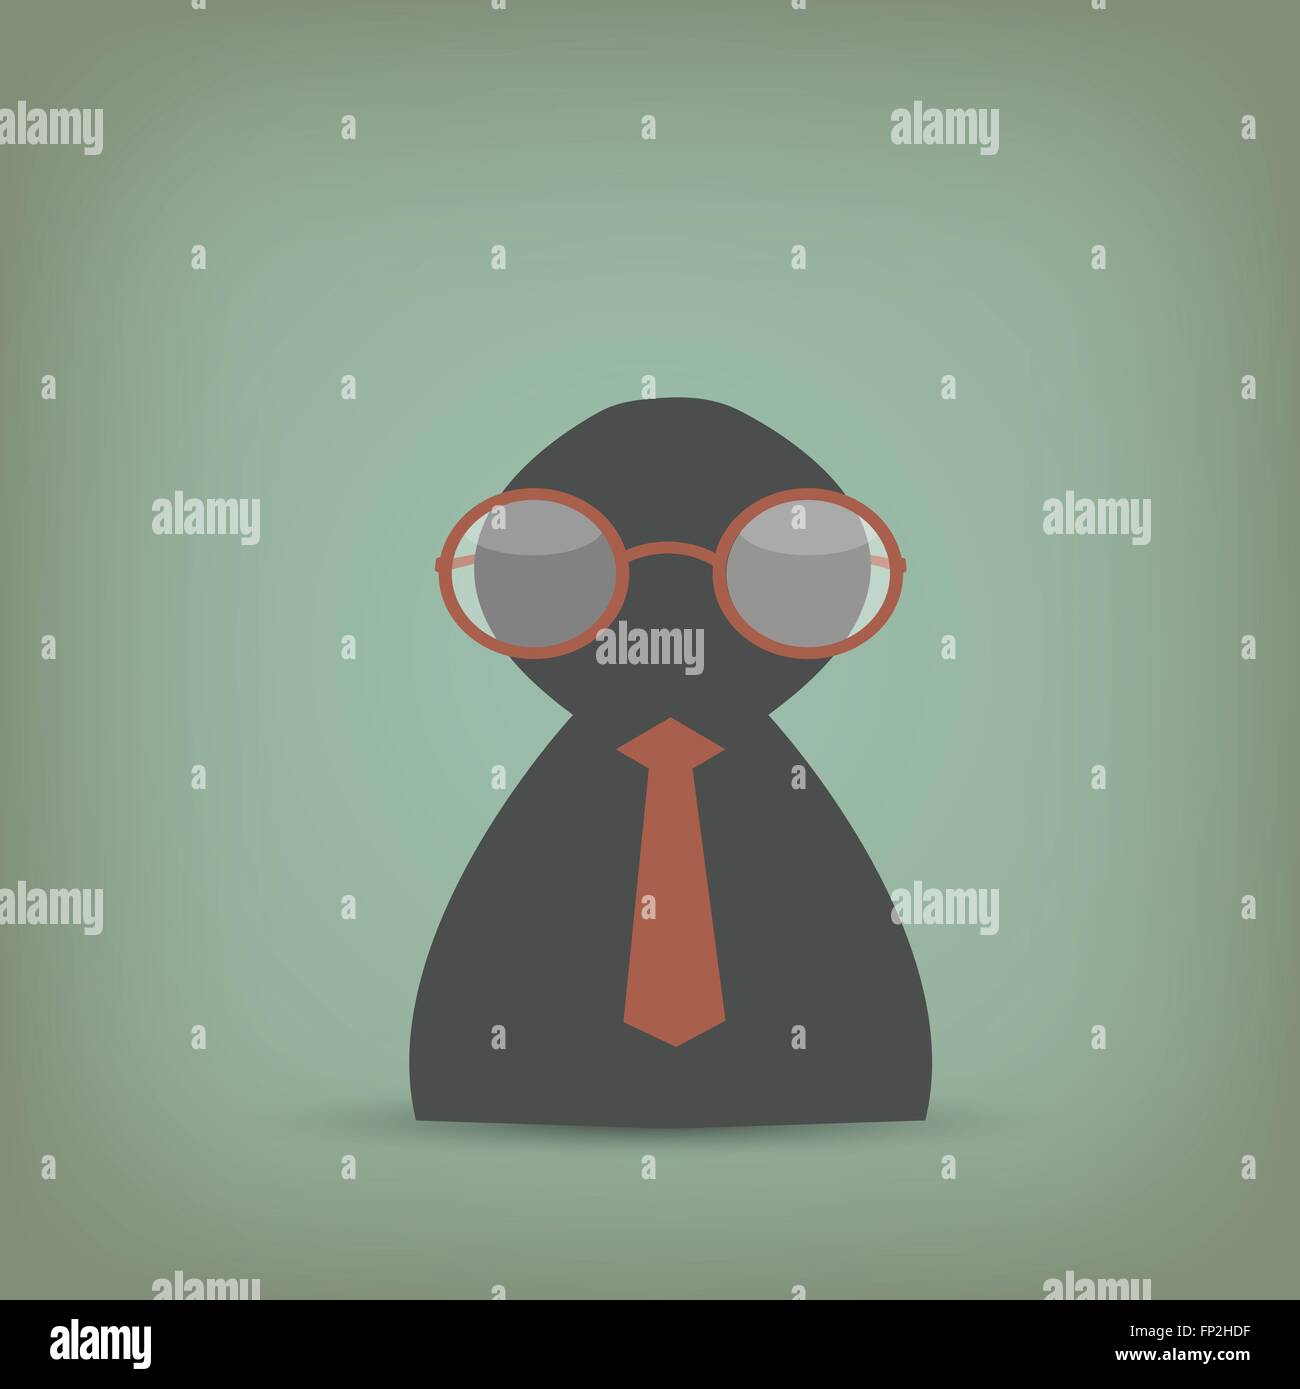 Illustration of a business person with reading glasses on a vintage background. Stock Vector